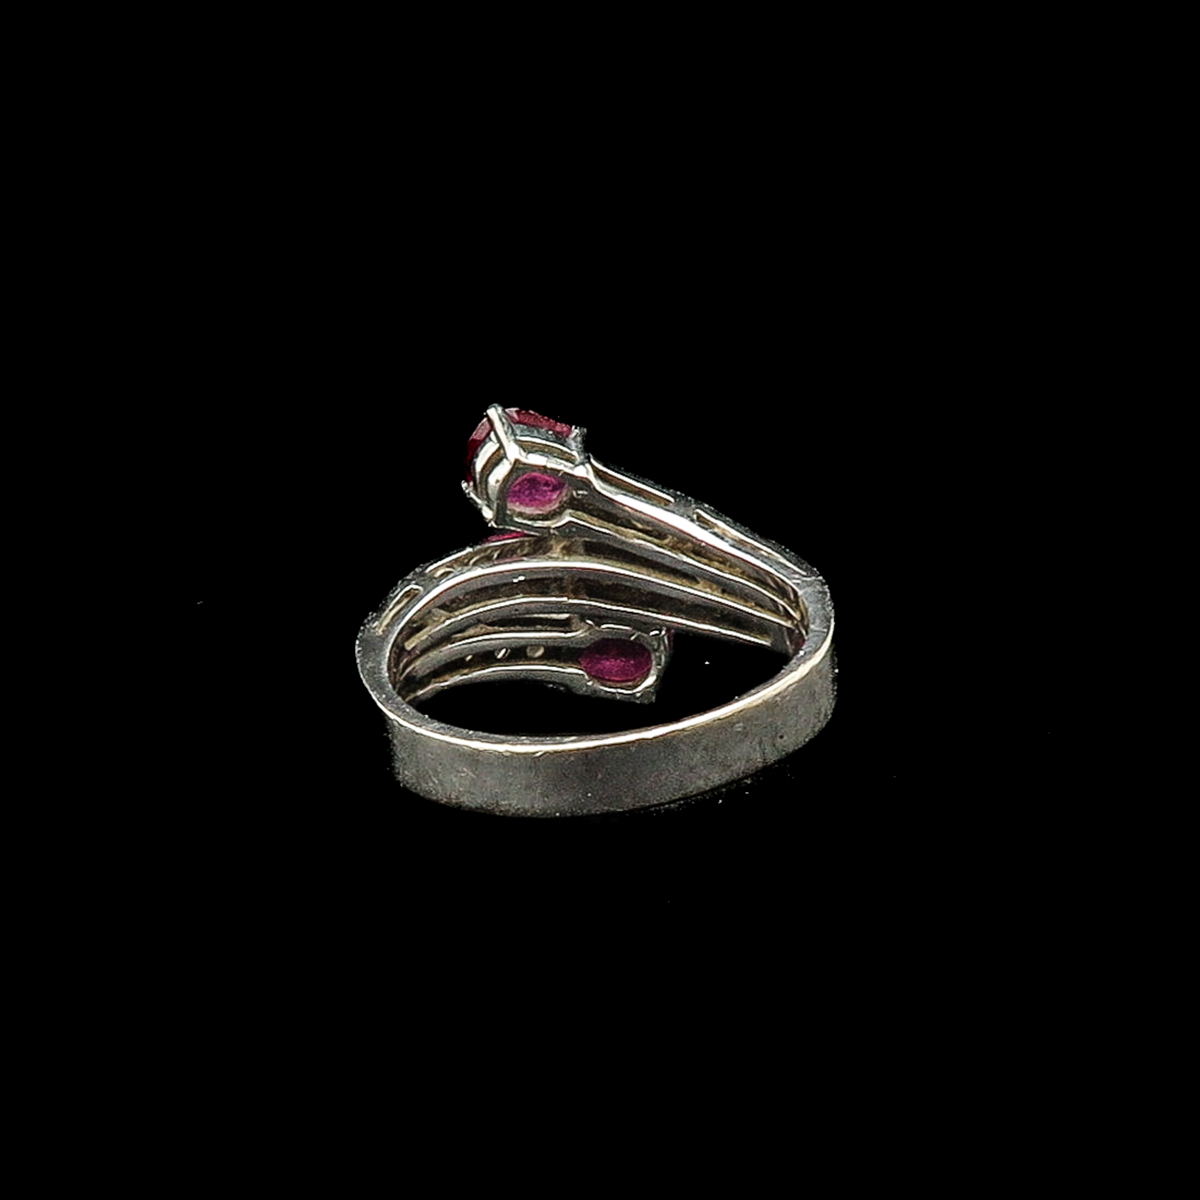 A Diamond and Ruby Ring and Bracelet - Image 5 of 7